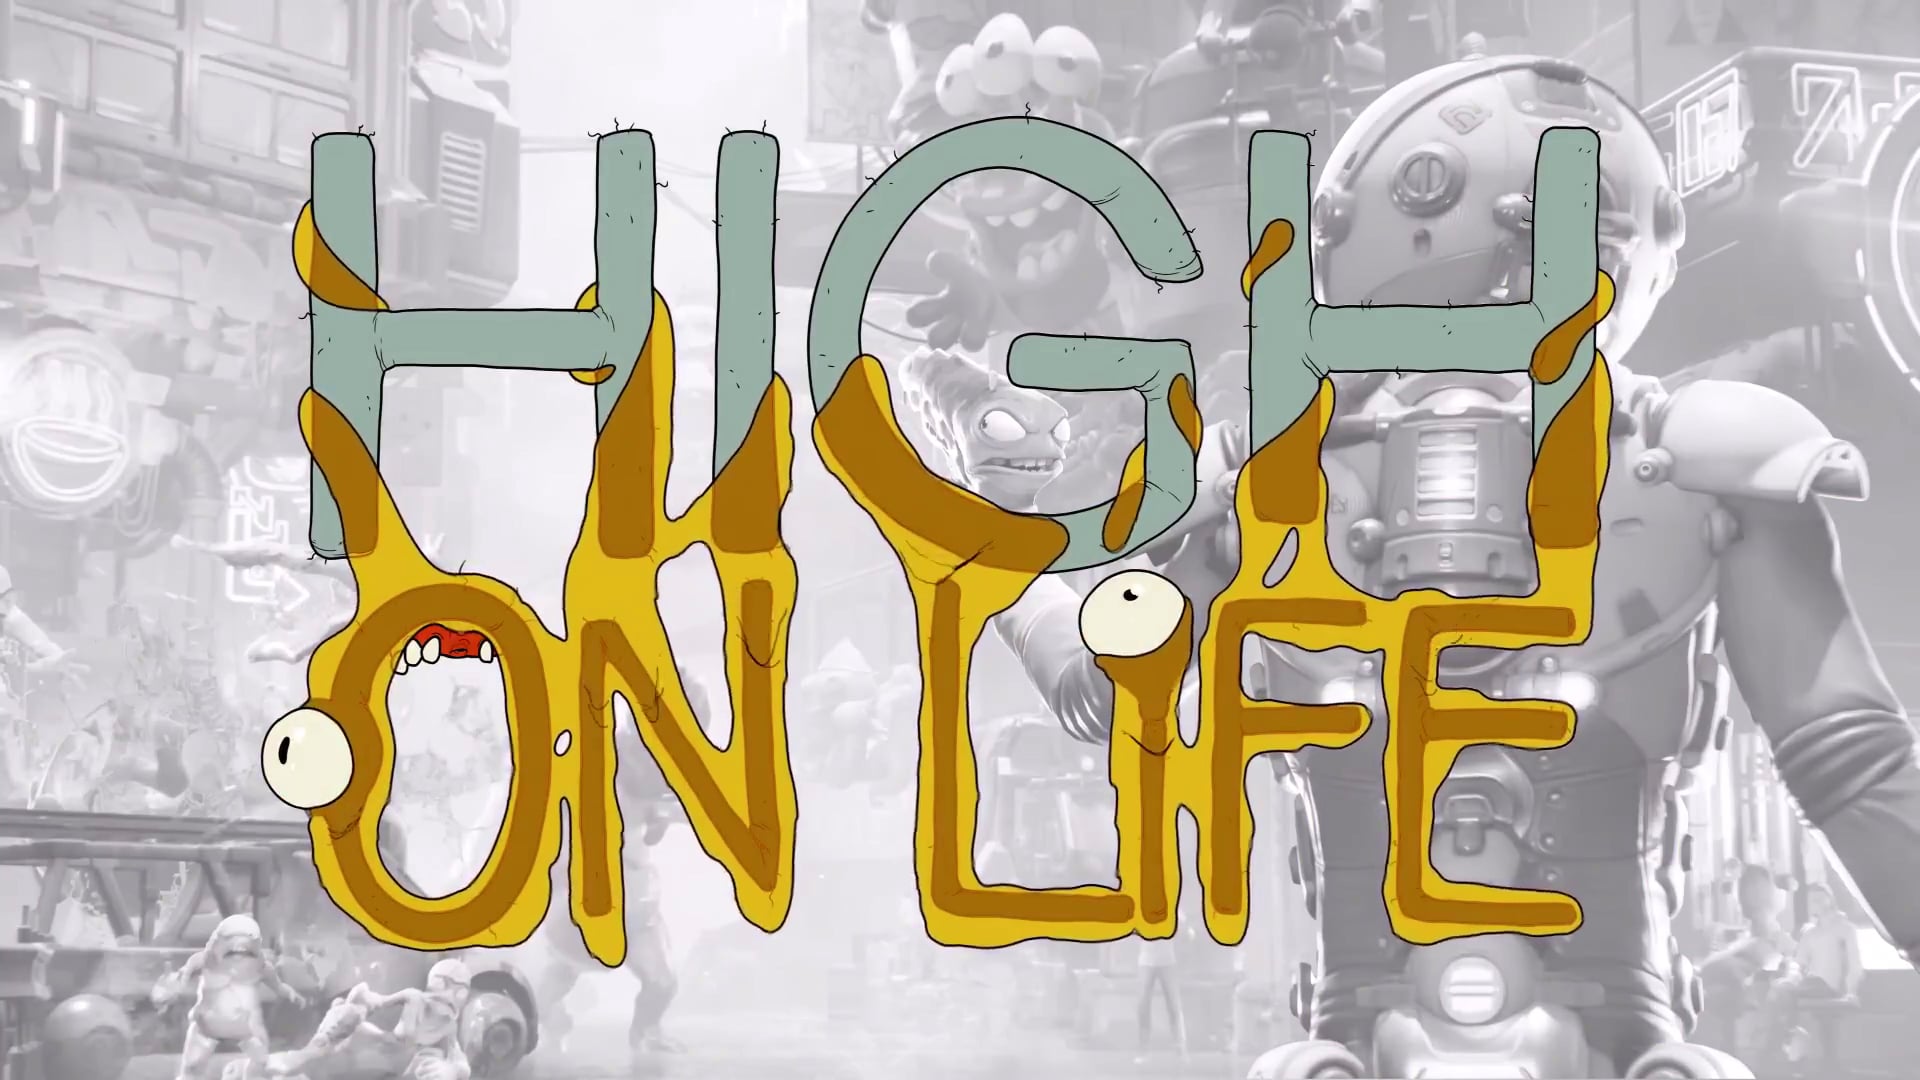 High on Life: trailer for the crazy sci-fi shooter released